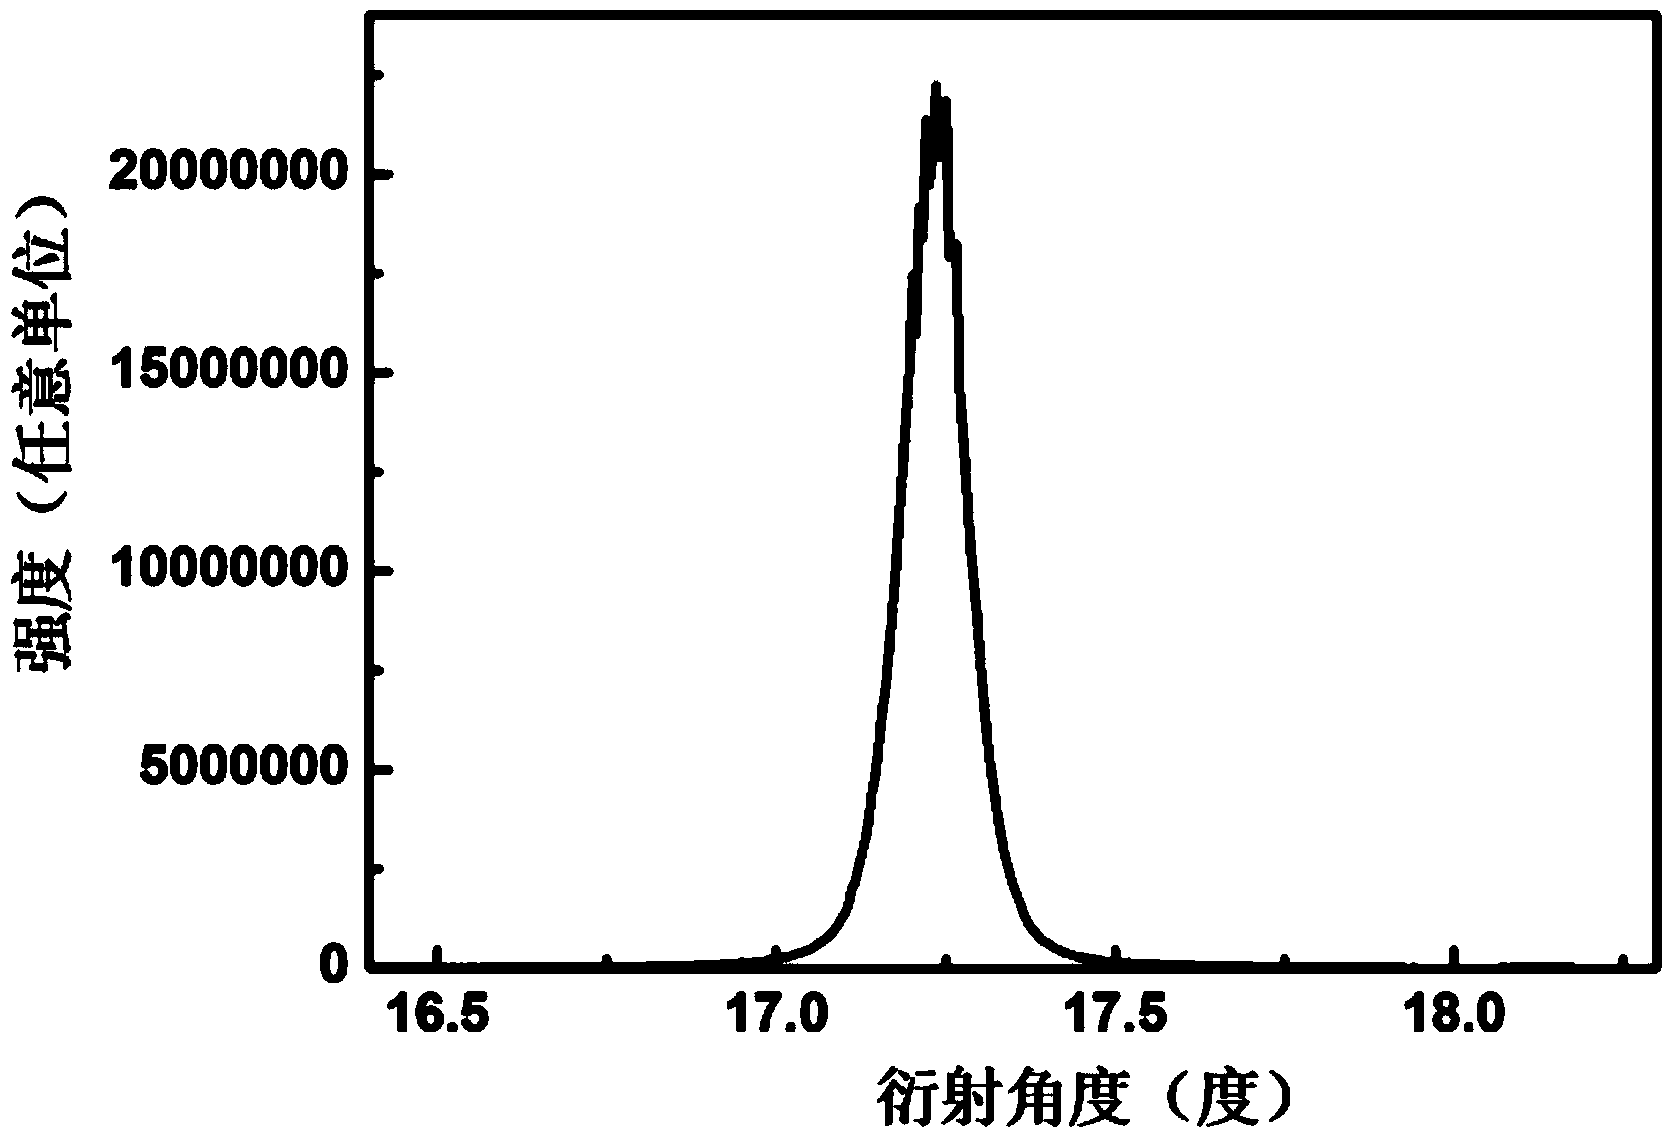 Light-emitting diode (LED) epitaxial wafer growing on Si patterned substrate and preparation process of LED epitaxial wafer